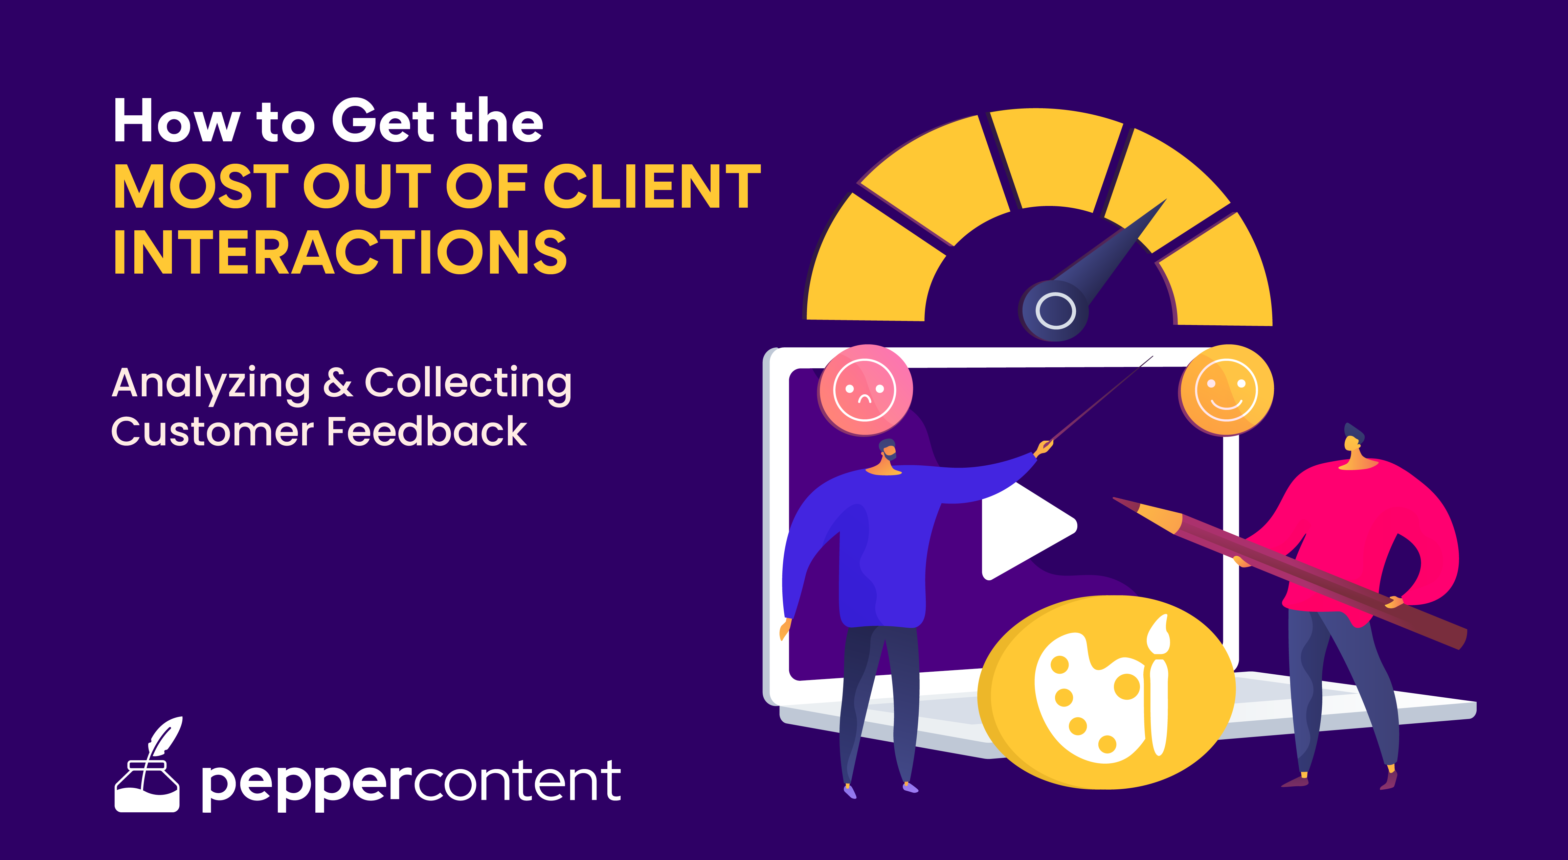 Feedback 101: How to Get the Most Out of Client Interactions